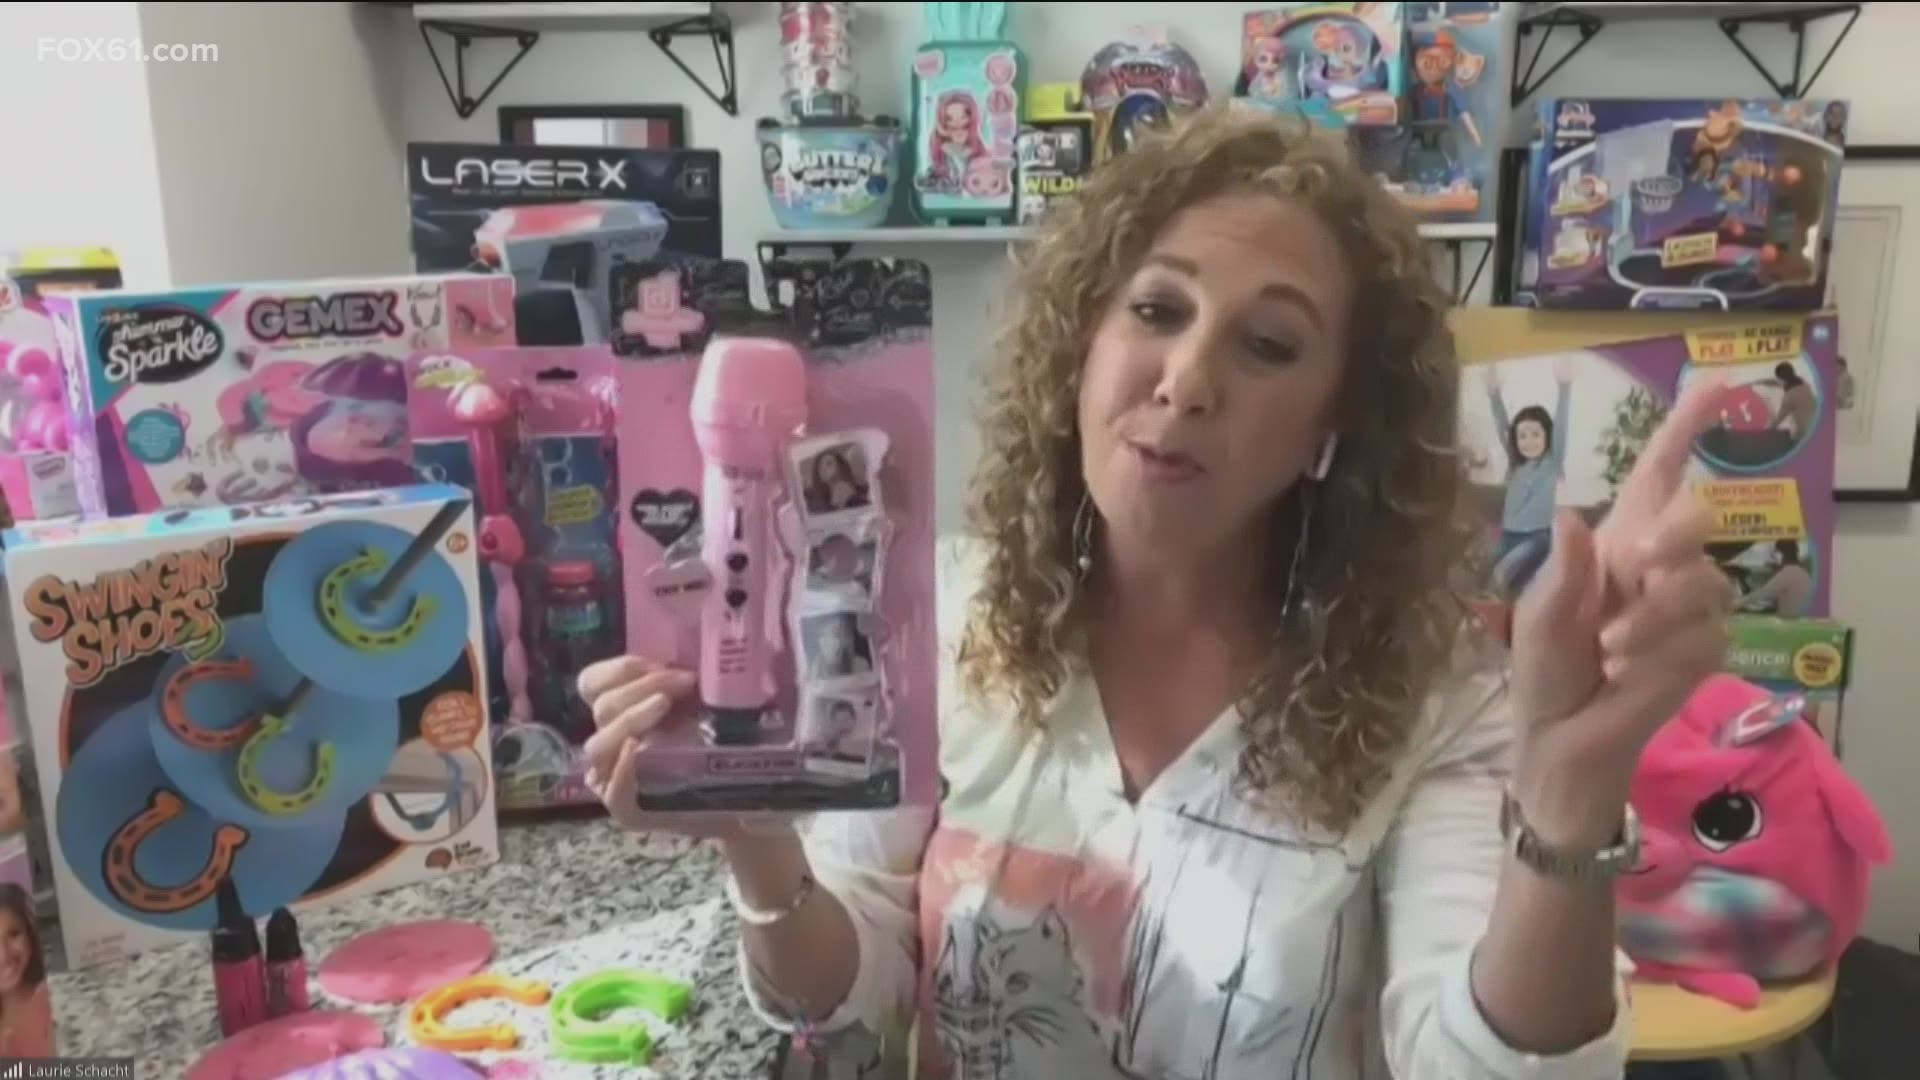 Laurie Schacht from the Toy Insider joins us this morning to give us the rundown of what toys are trending for the spring season!